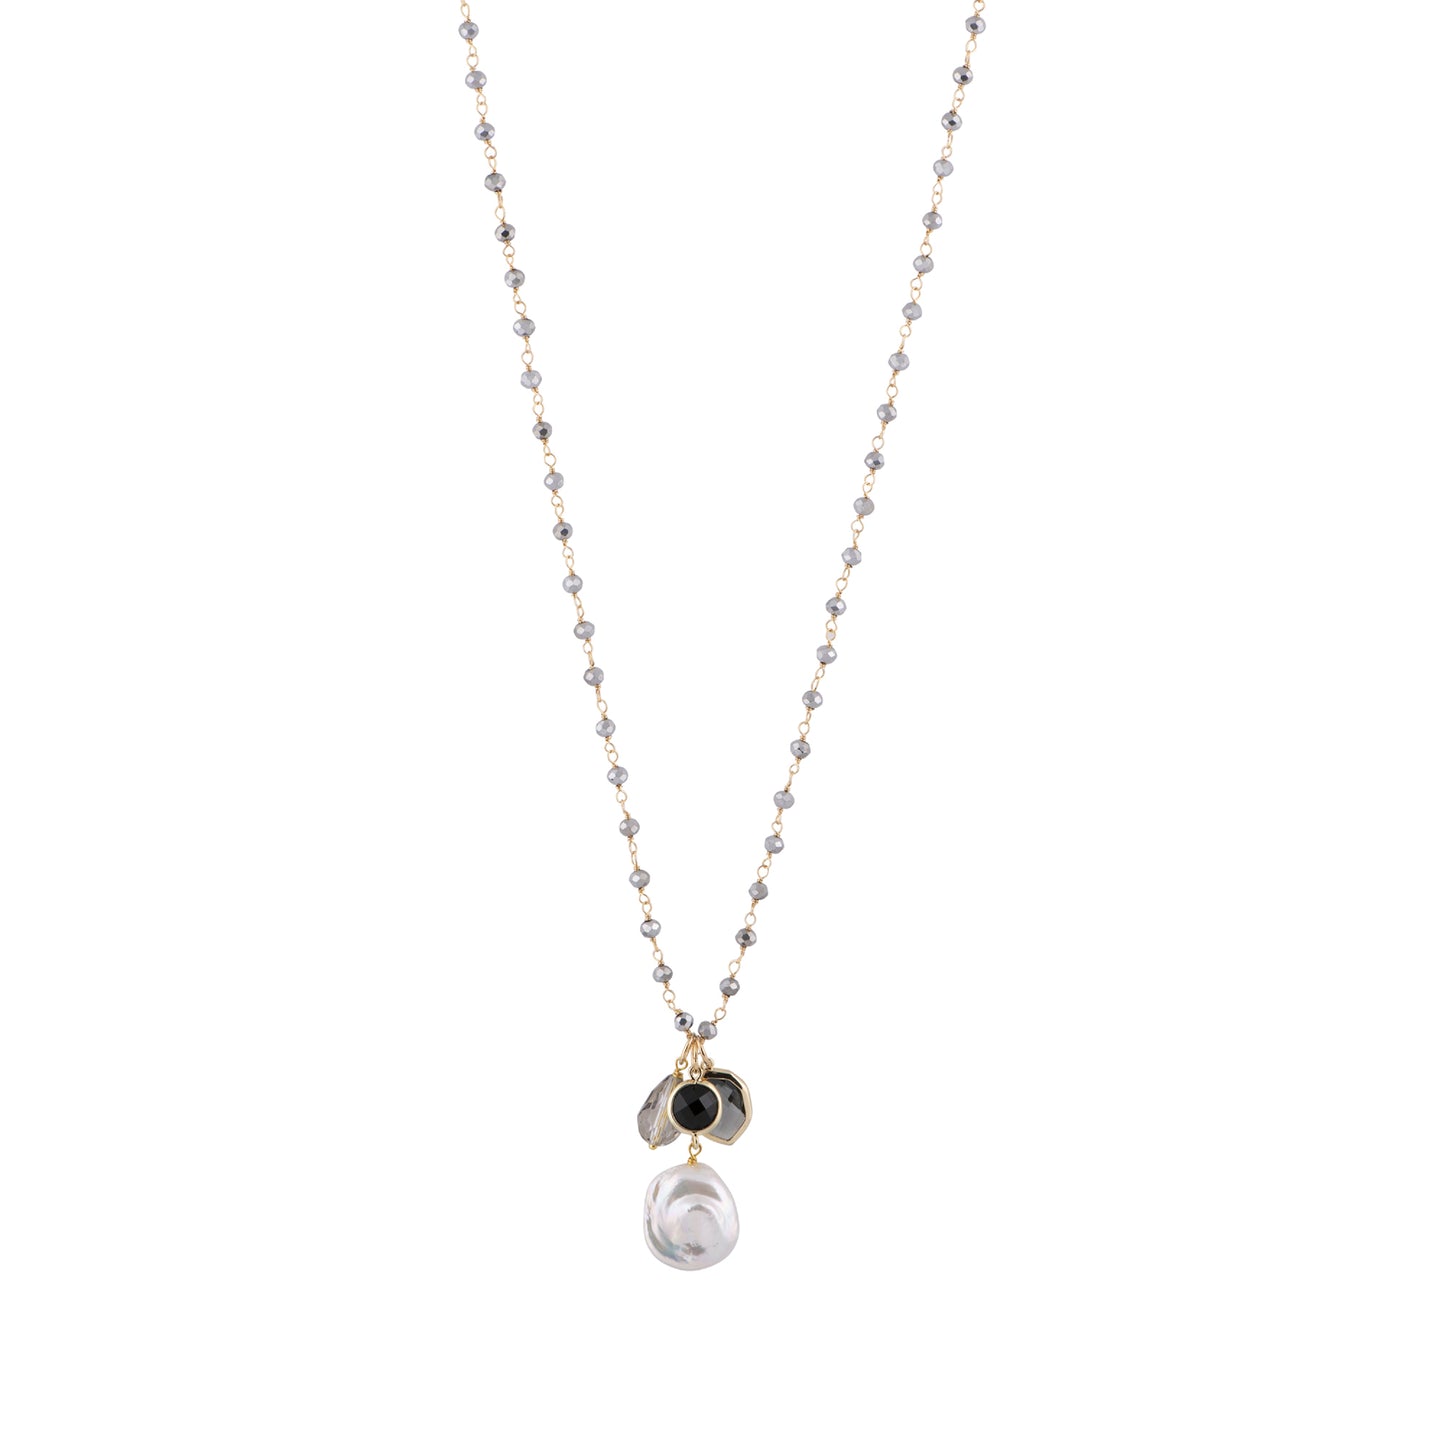 Marla - White coin pearl necklace with charm (Silver)